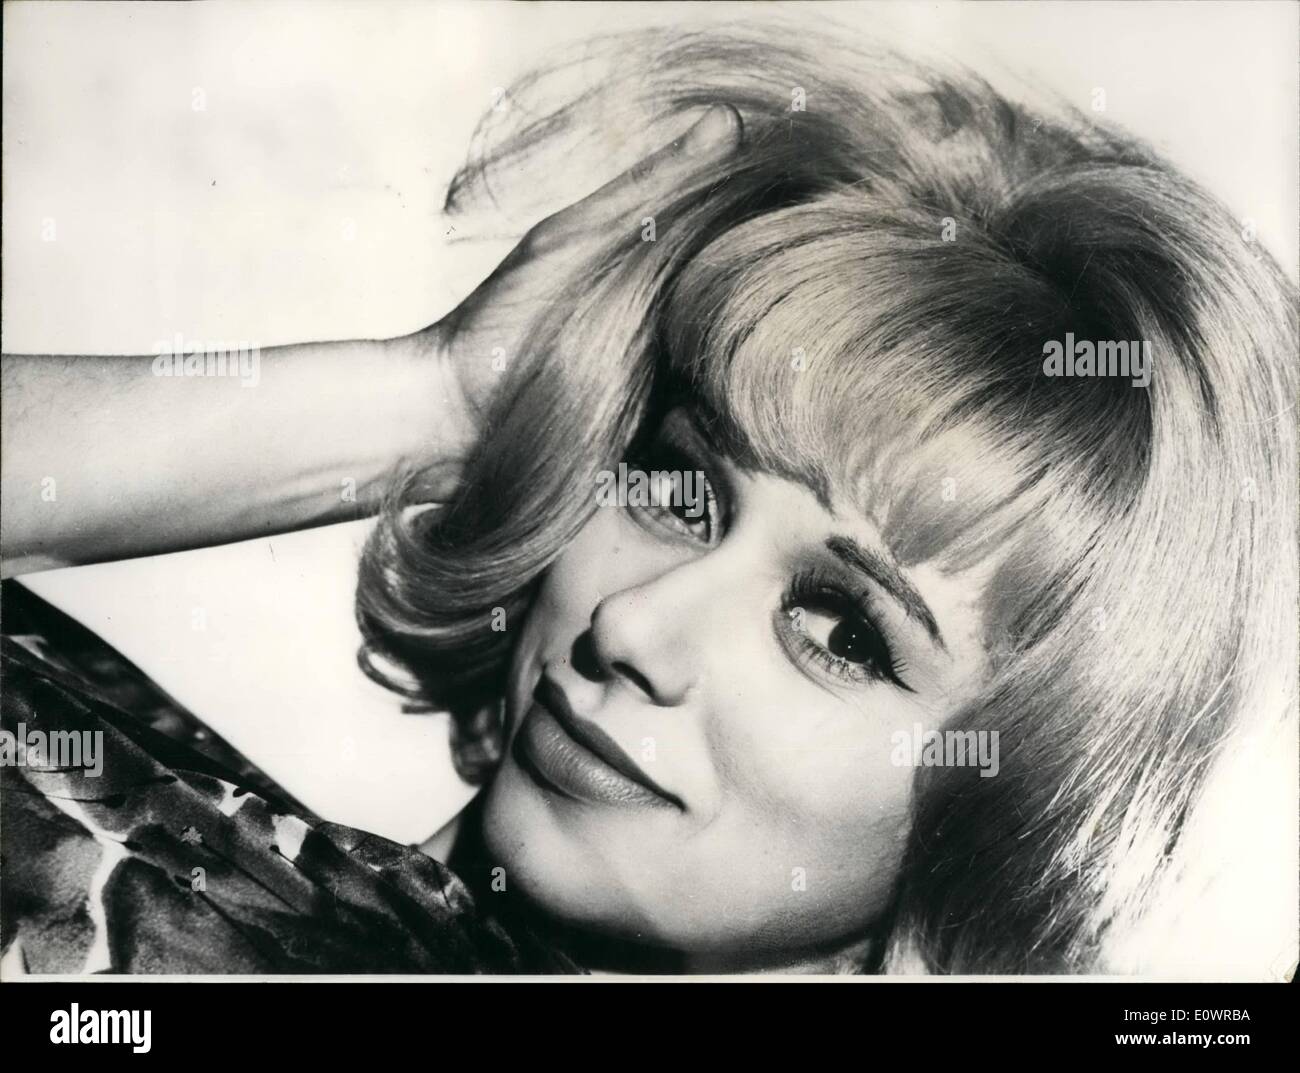 Feb. 02, 1964 - Young Actress Mireille Darc is the latest Co-star of ''Mister'' Jean Gabin; Young Actress Mireille Darc was selected to be the co-star of Jean Gabin in the latter's film ''Mister'' directed by Jean Paul Le Chanois. Her charm easily conquered the great old man of the French movies who in this film will play the part of a rich banker that twist of fate make him a servant. Photo Shows Mireille Darc as she appears opposite Jean Gabin in ''Mister' Stock Photo